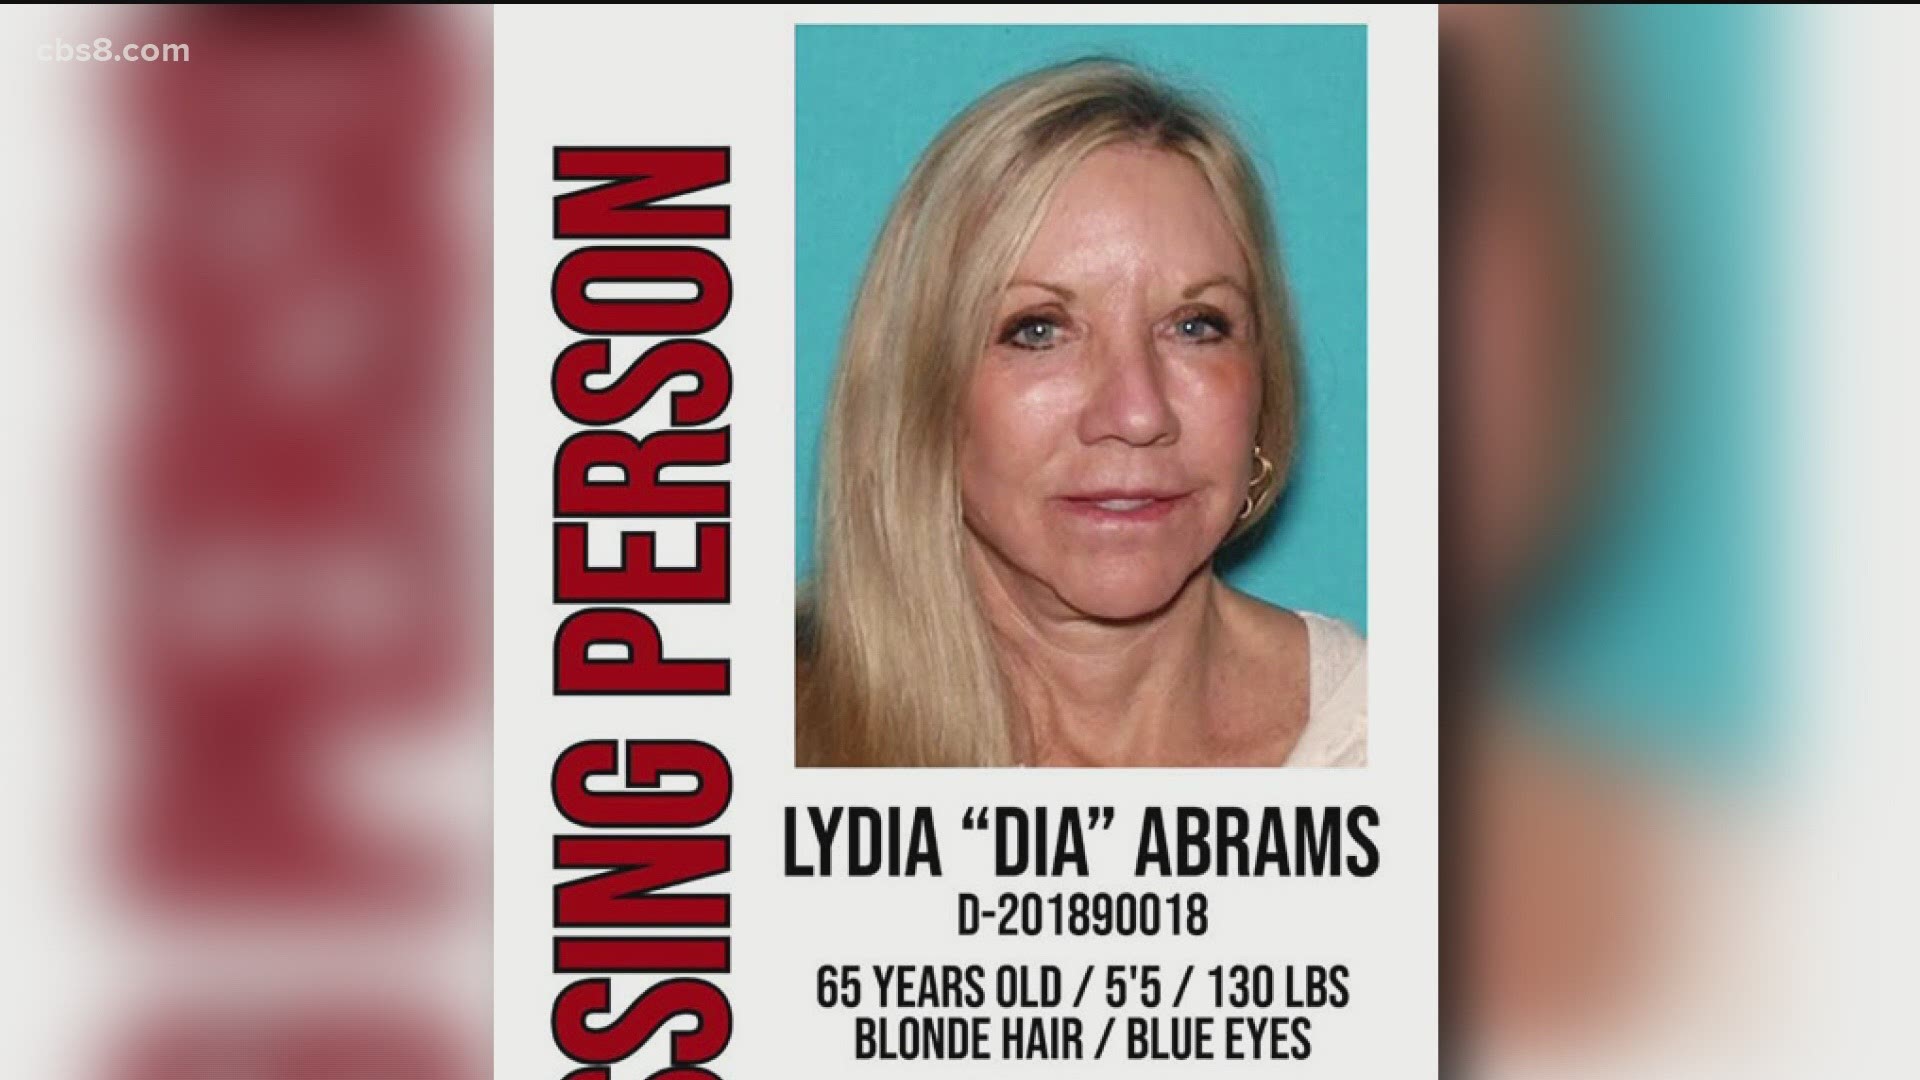 The self-proclaimed fiancé of a woman who went missing from her ranch near Idyllwild in June has filed a lawsuit, in which he claims to have power of attorney.